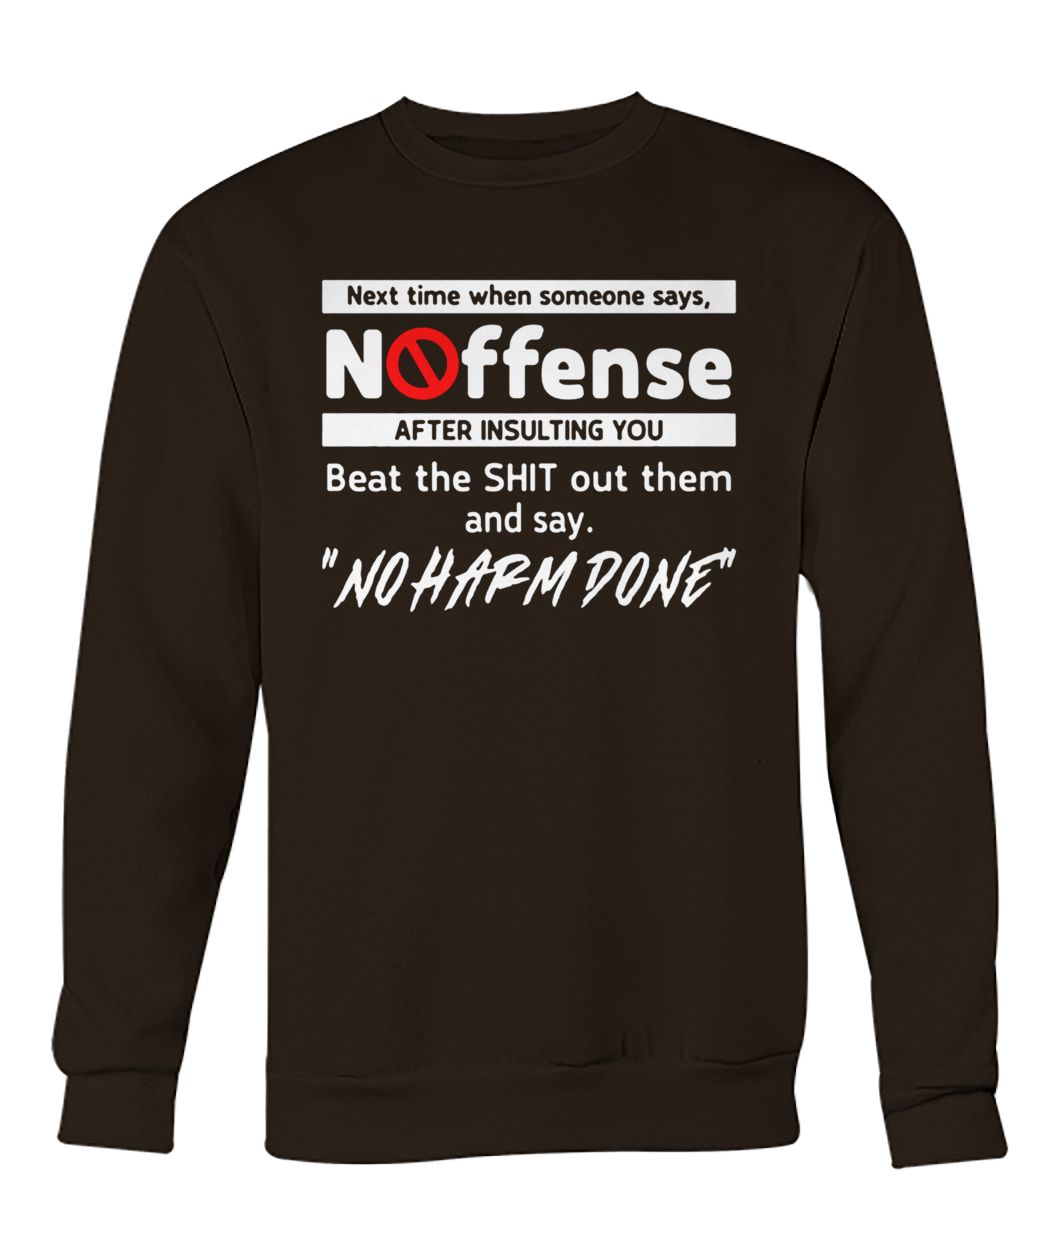 Next time when someone says no offense after insulting you crew neck sweatshirt